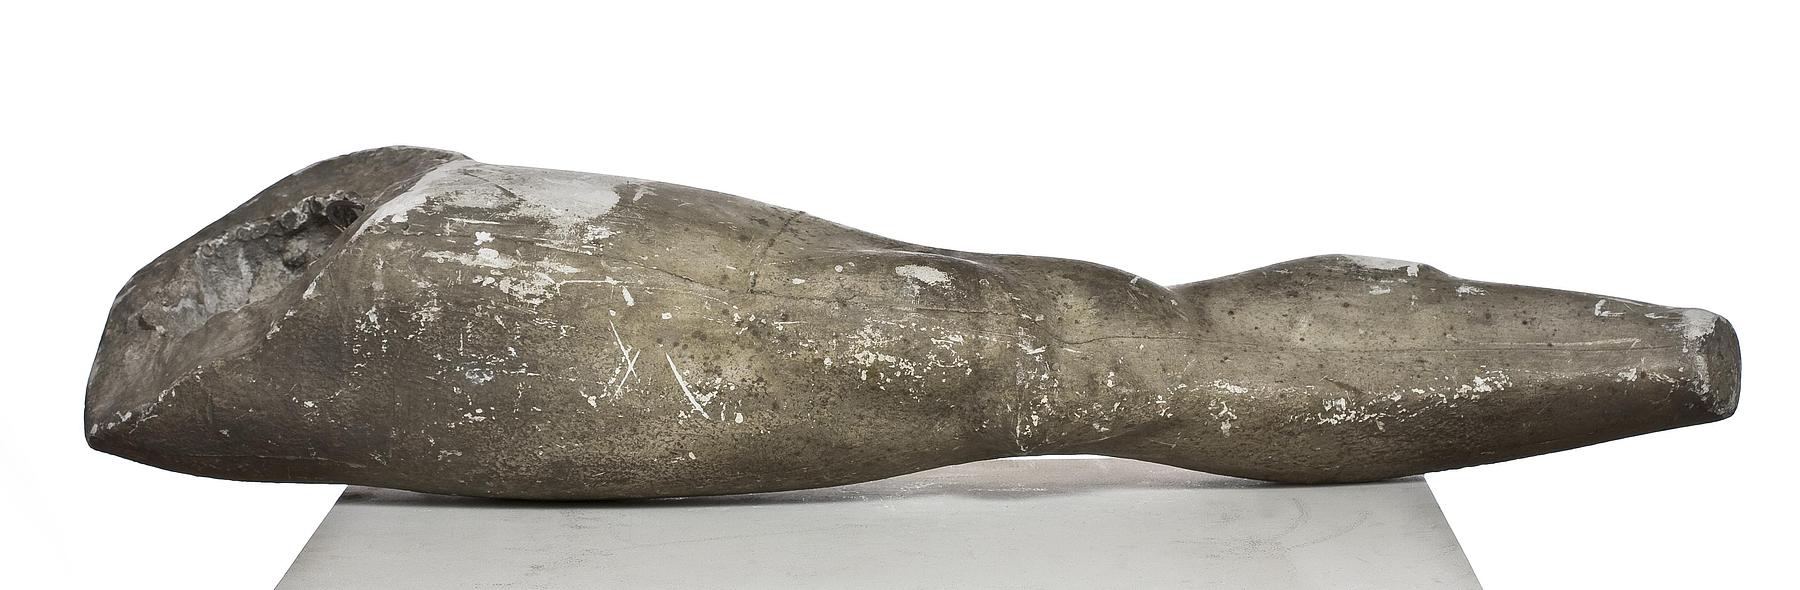 A bended right leg with part of the buttock, L23